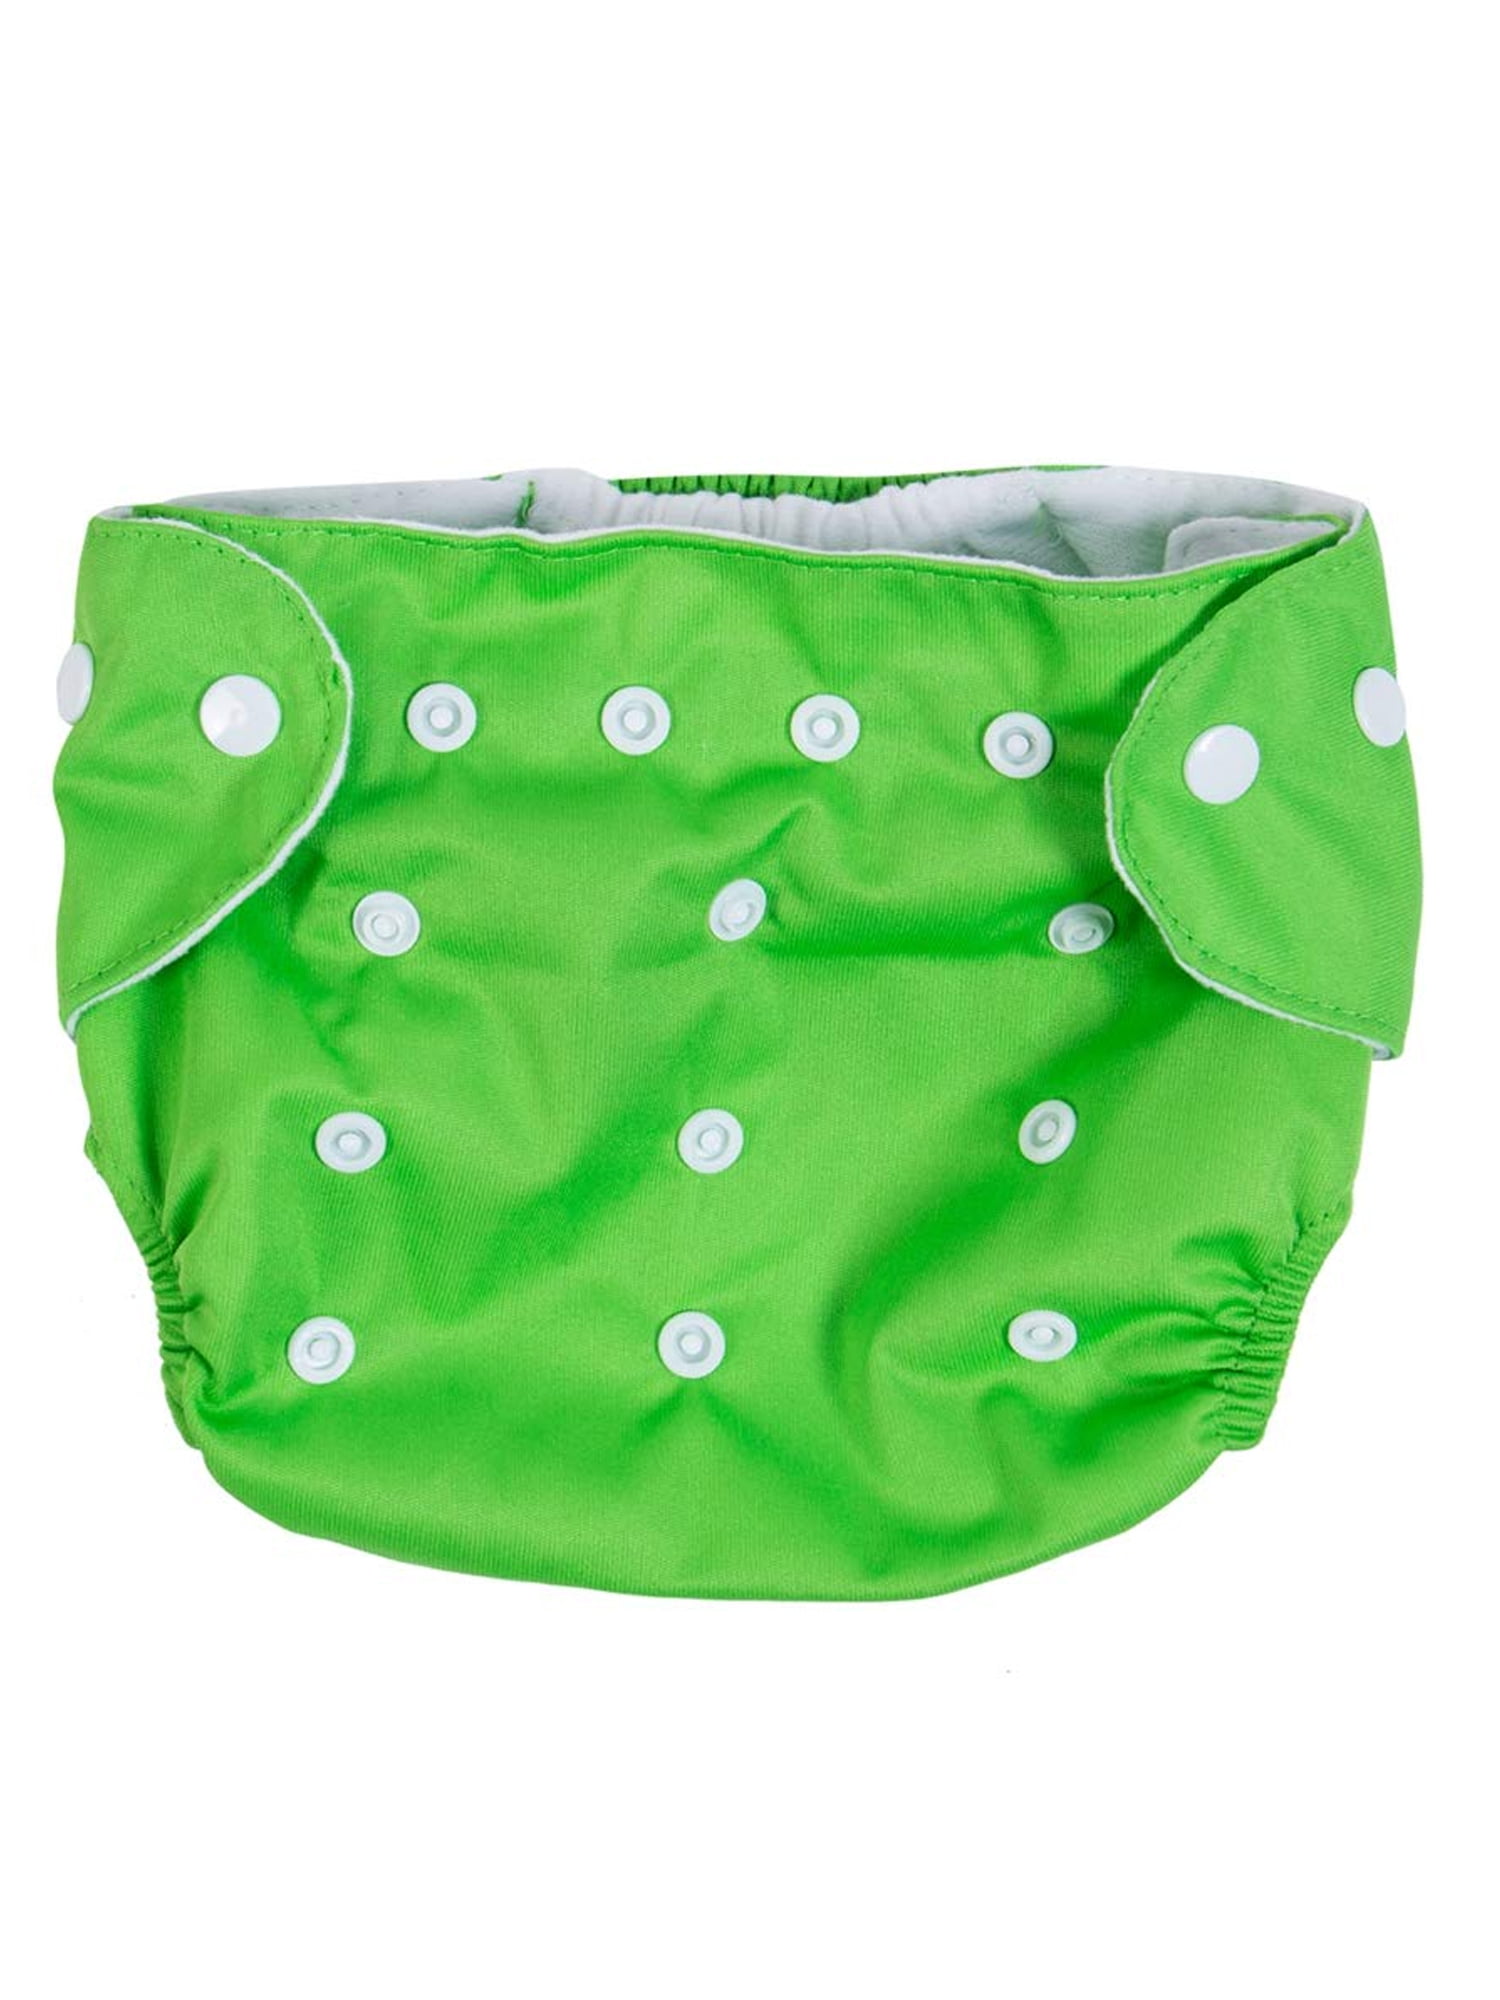 Modern Cloth Reusable Washable Baby Nappy Diaper /& Insert Sail Boats